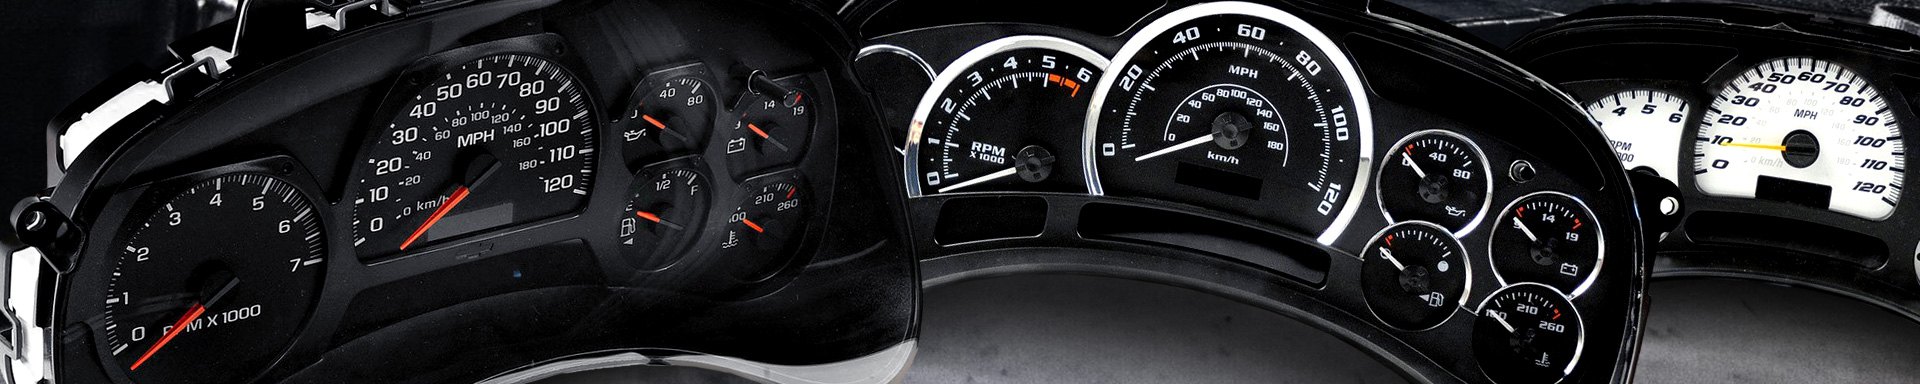 Myth or Truth? Dashboard Warning Lights are Not Critical and Can Be Ignored Until Later